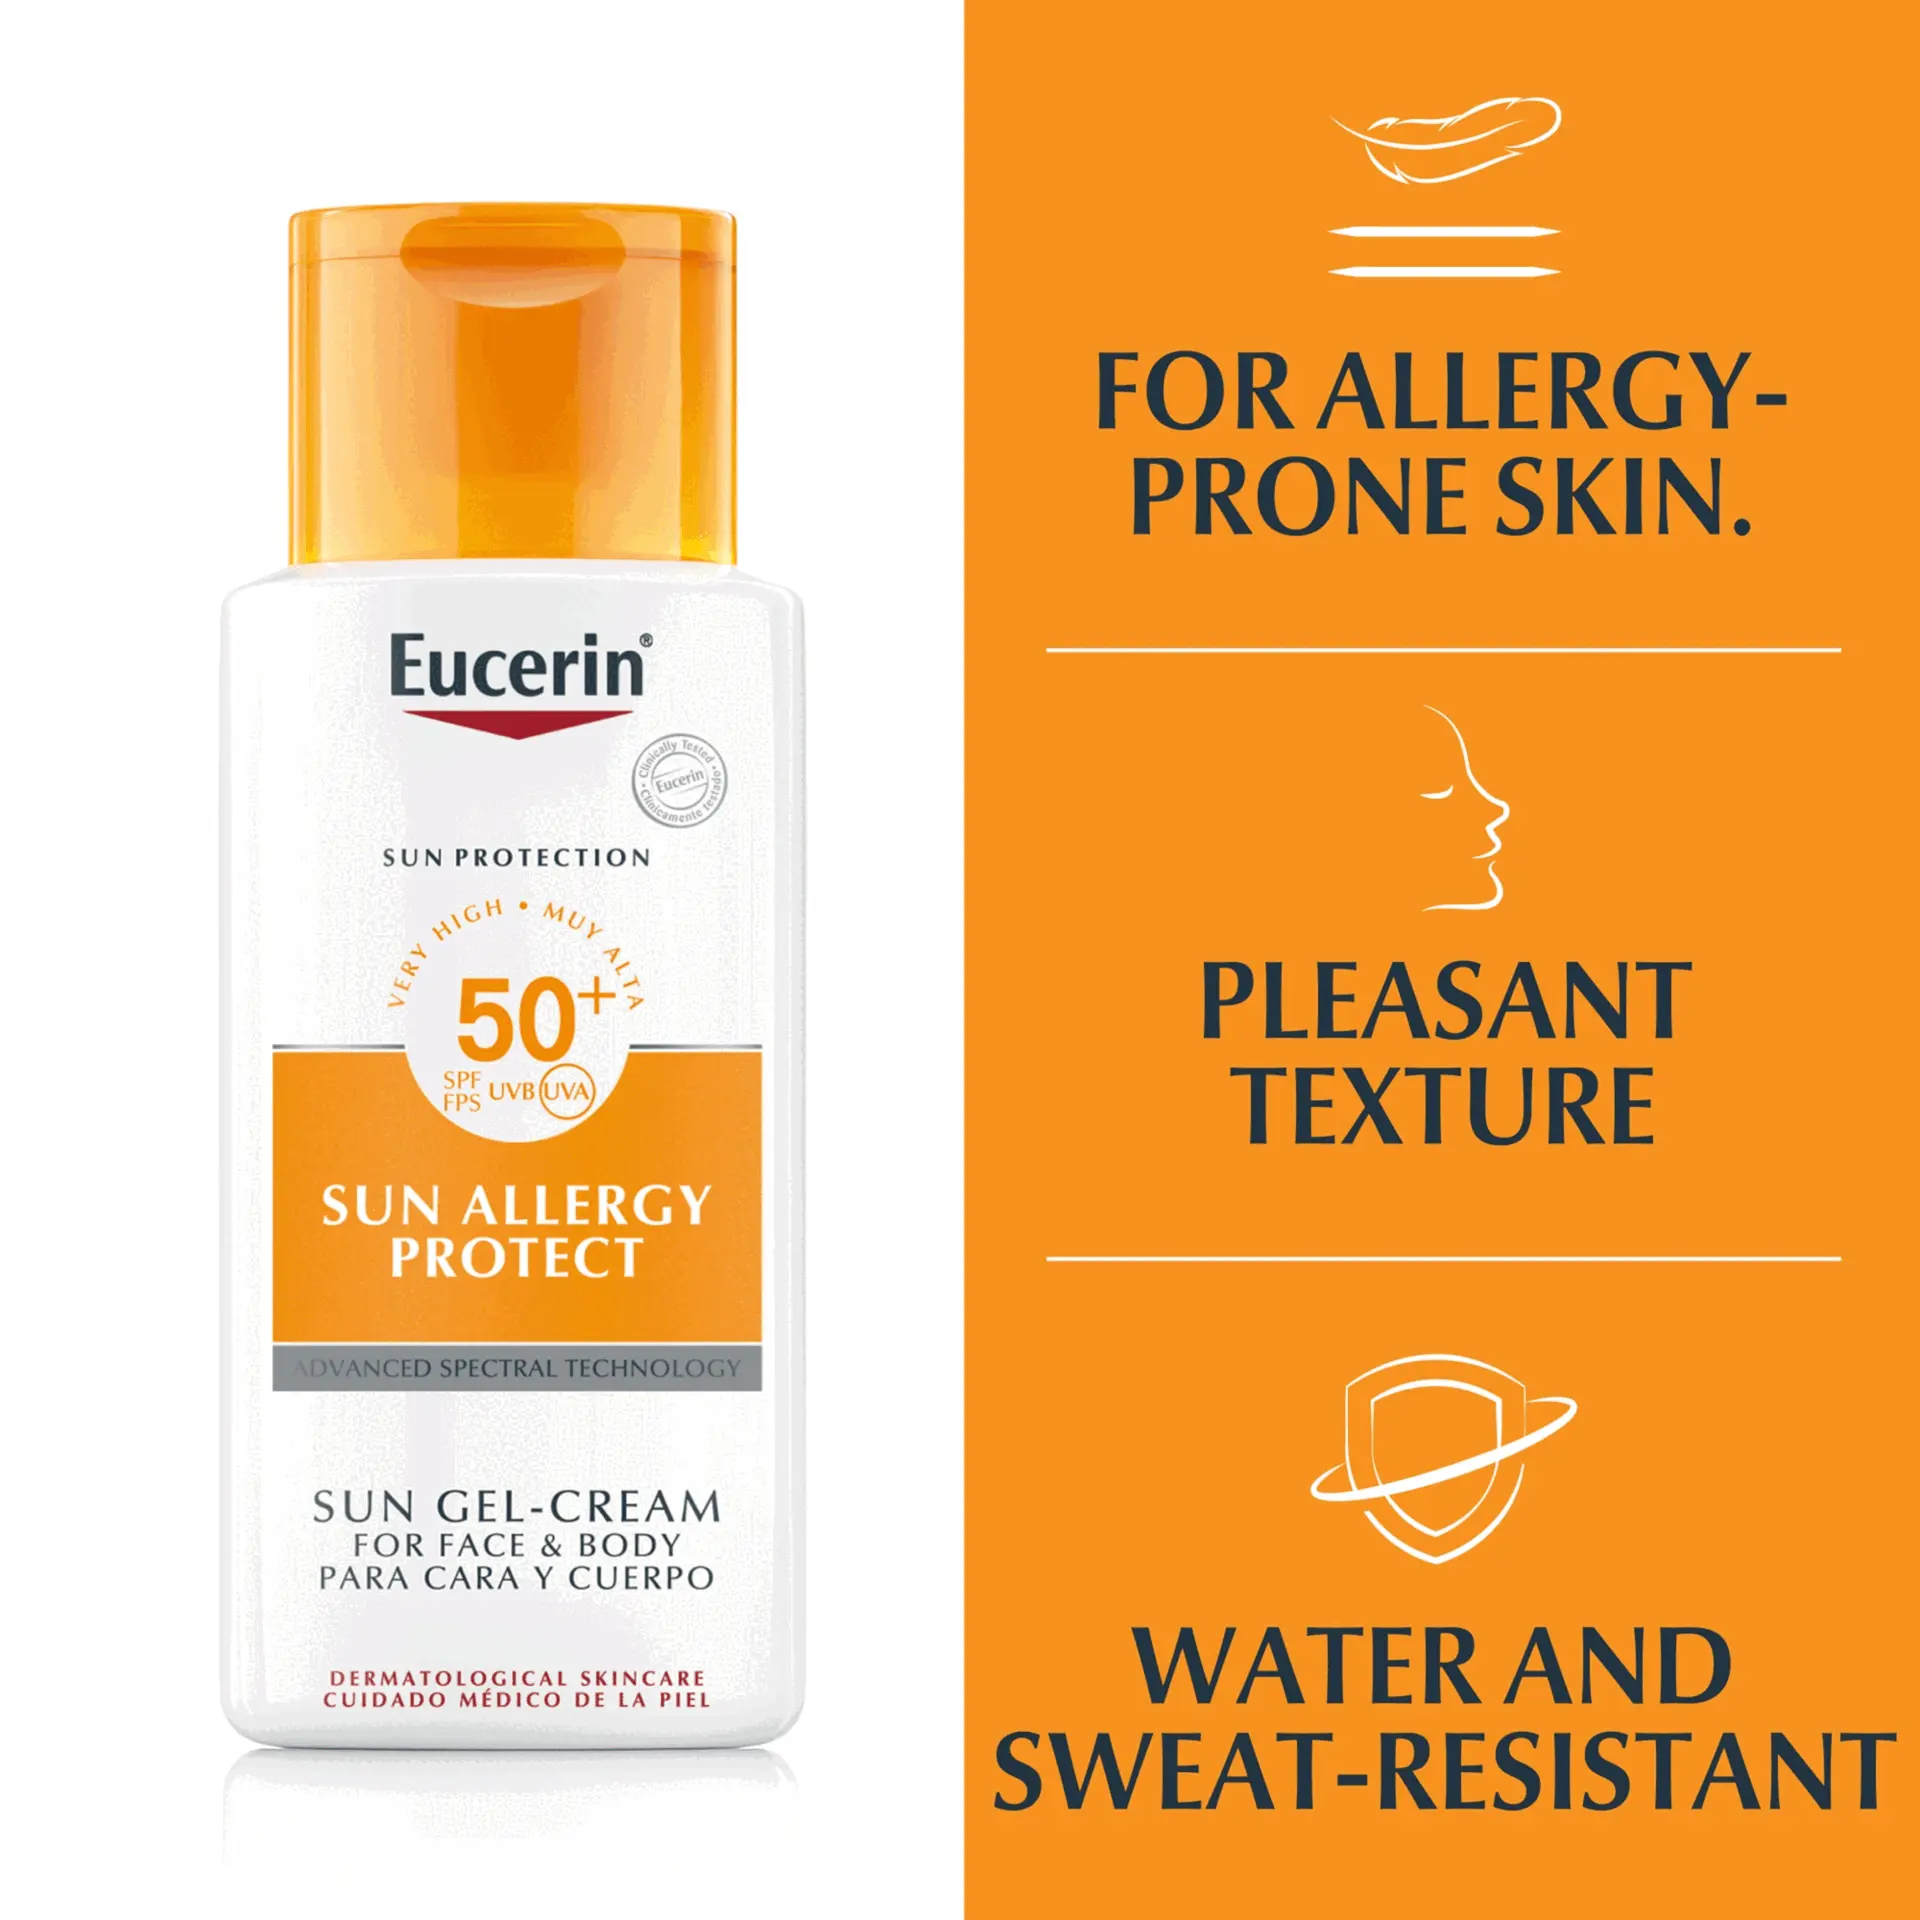 Image 1, Eucerin® SUN PROTECTION VERY HIG MUY ALTA 50+ SPF FPS UVB (UVA) Clinically Eucerin Tested SUN ALLERGY PROTECT ADVANCED SPECTRAL TECHNOLOGY SUN GEL-CREAM FOR FACE & BODY PARA CARA Y CUERPO FOR ALLERGY- PRONE SKIN. PLEASANT TEXTURE DERMATOLOGICAL SKINCARE CUIDADO MÉDICO DE LA PIEL WATER AND SWEAT-RESISTANT Image 2, 99% CONFIRM PROTECTS EFFECTIVELY FROM SUNBURN* * PRODUCT IN USE STUDY WITH 133 WOMEN AGED 22-55, 2019 Image 3, LICOCHALCONE A ALPHA-GLYCOSYLRUTIN Image 4, DISCOVER MORE EUCERIN SUN KIDS Eucerin EUCERIN AFTER SUN EUCERIN SUN FACE Eucerin® AFTER SUN SUN PROTECTION HIGH 50 SENSITIVE PROTECT KIDS SUN SPRAY SENSITIVE RELIEF GEL-CREAM FACE AND BODY PARA CARA Y CUERPO Eucerin® SUN PROTECTION Prs from Soedes children's DERMATOLOGICAL SKINCARE 50* OIL CONTROL ADVANCED SPECTRAL TECHNOLOGY ORY ACNE PRONE SON DRY TOUCH SUN GEL CREAM ULTRA LIGHT DERMATOLOGICAL SKINCARE